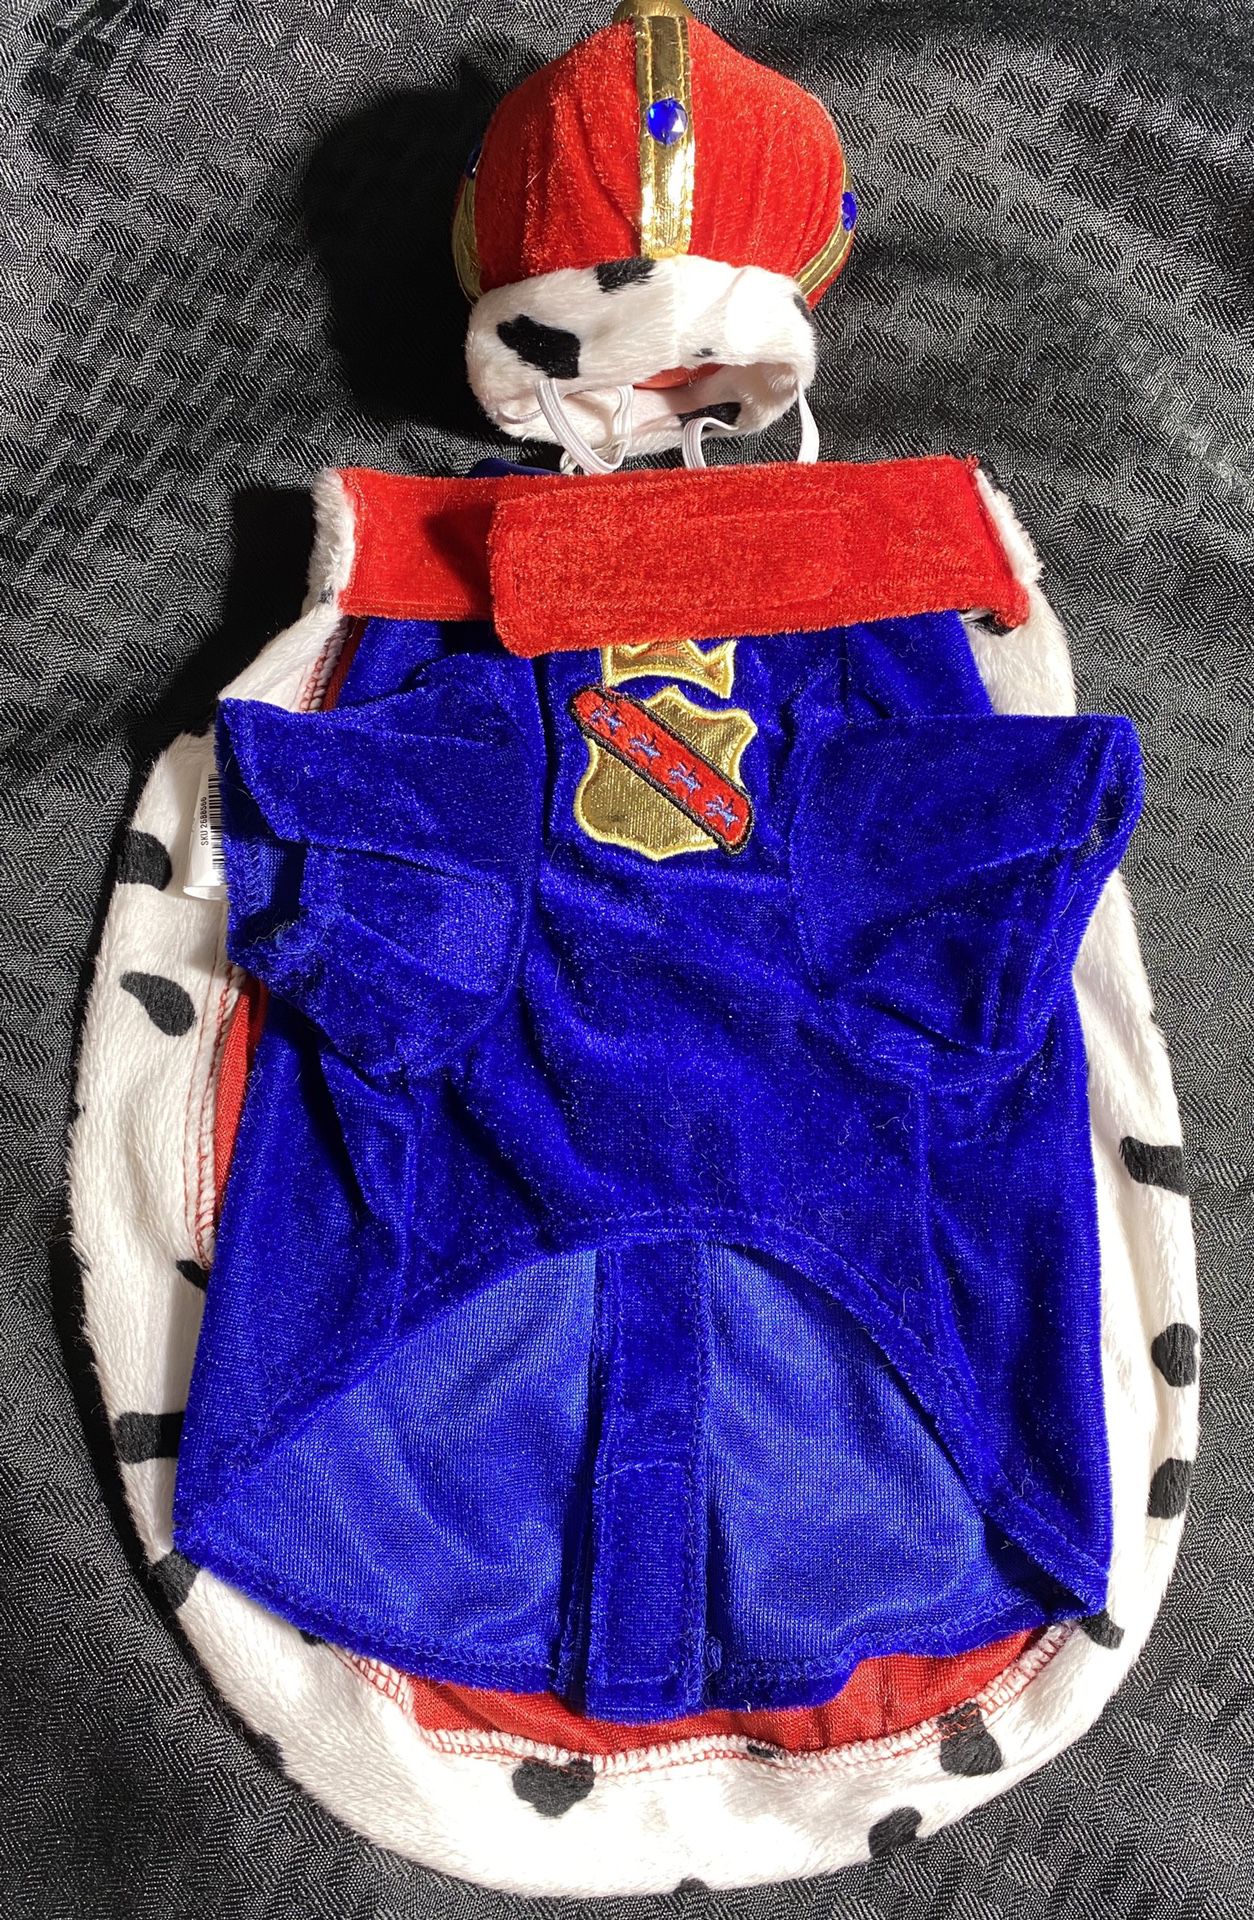 Royal Pet Costume by Bootique (King, Dog, Cat, Small Animal, XS, Small)